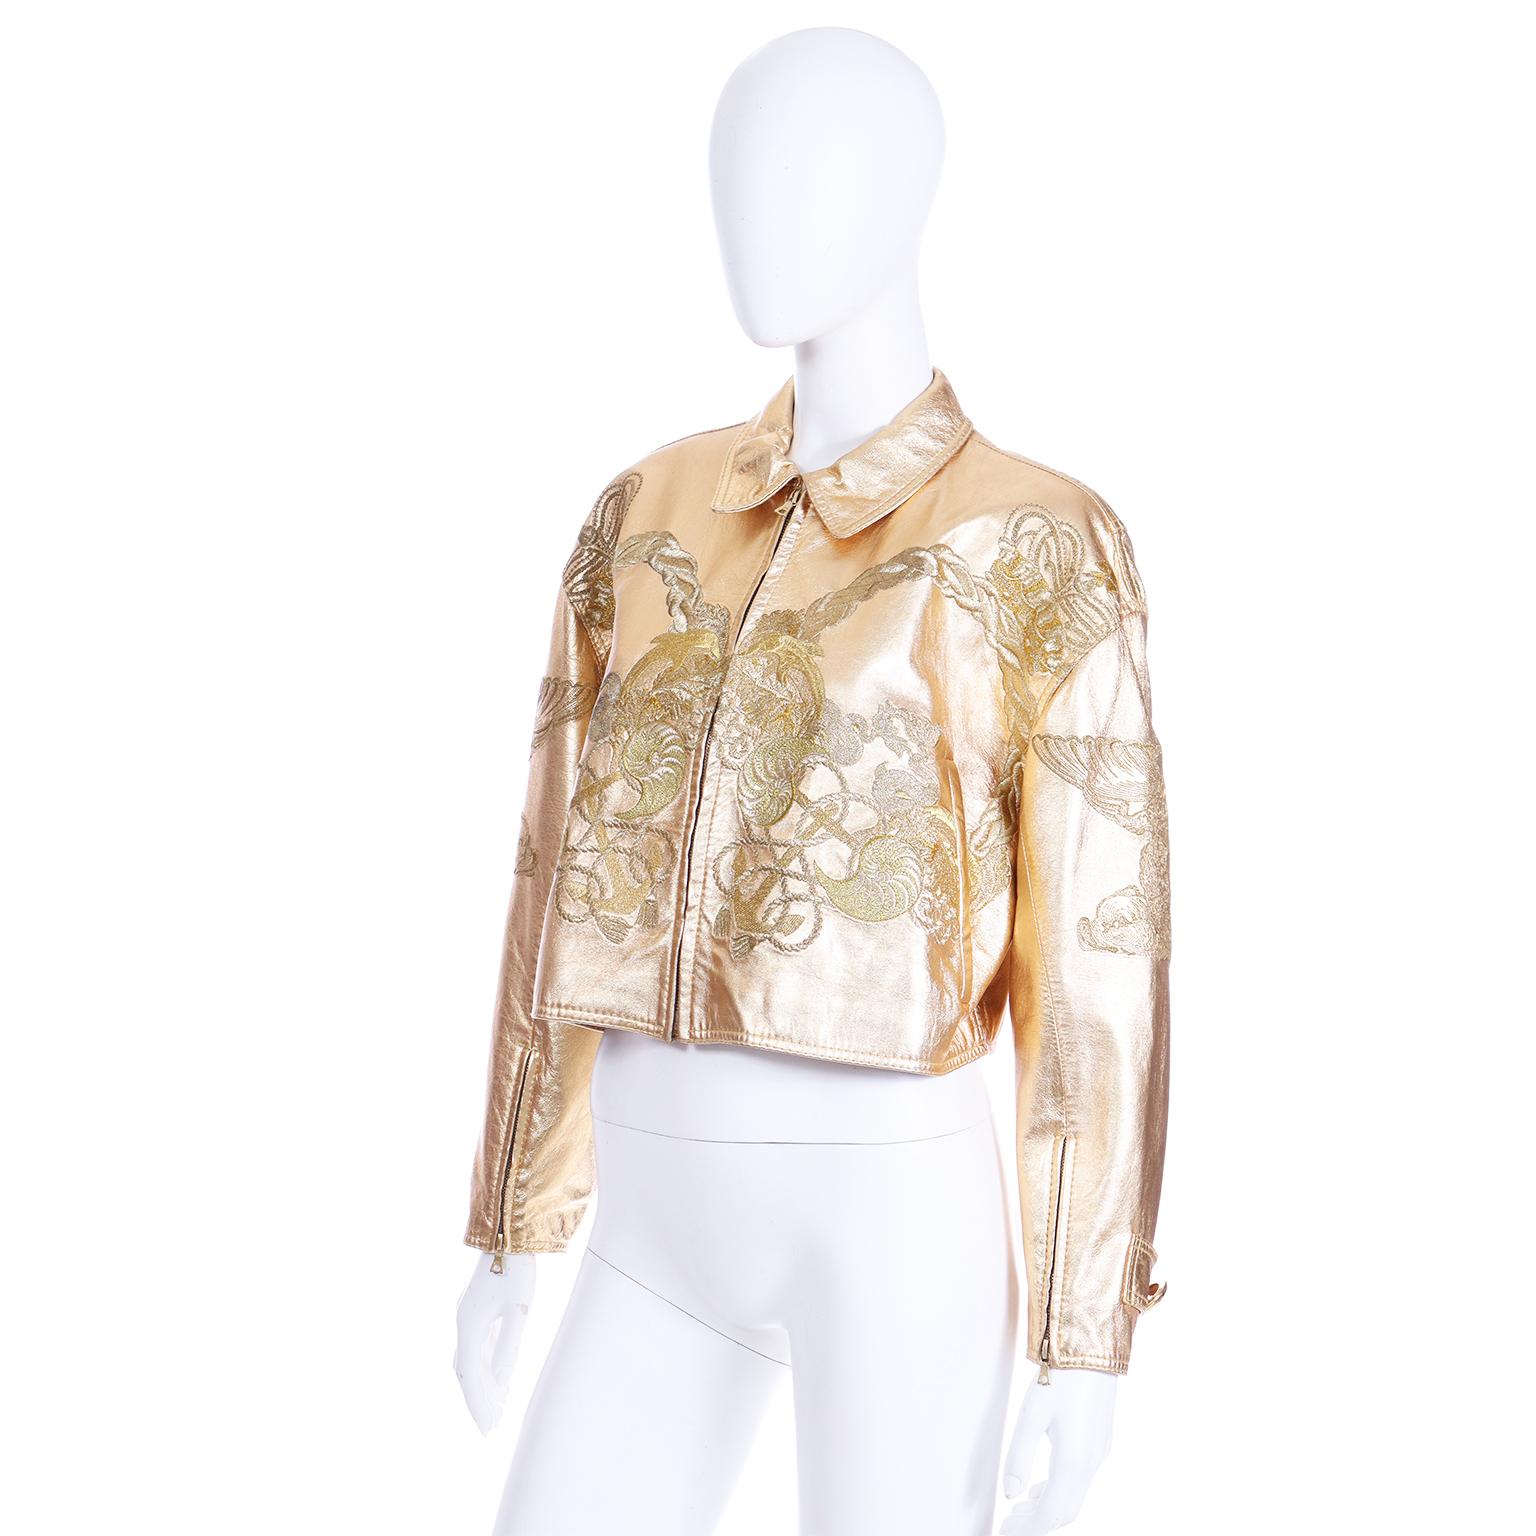 Gianfranco Ferre S/S 1992 Runway Gold Leather Embroidered Ocean Theme Jacket For Sale 2